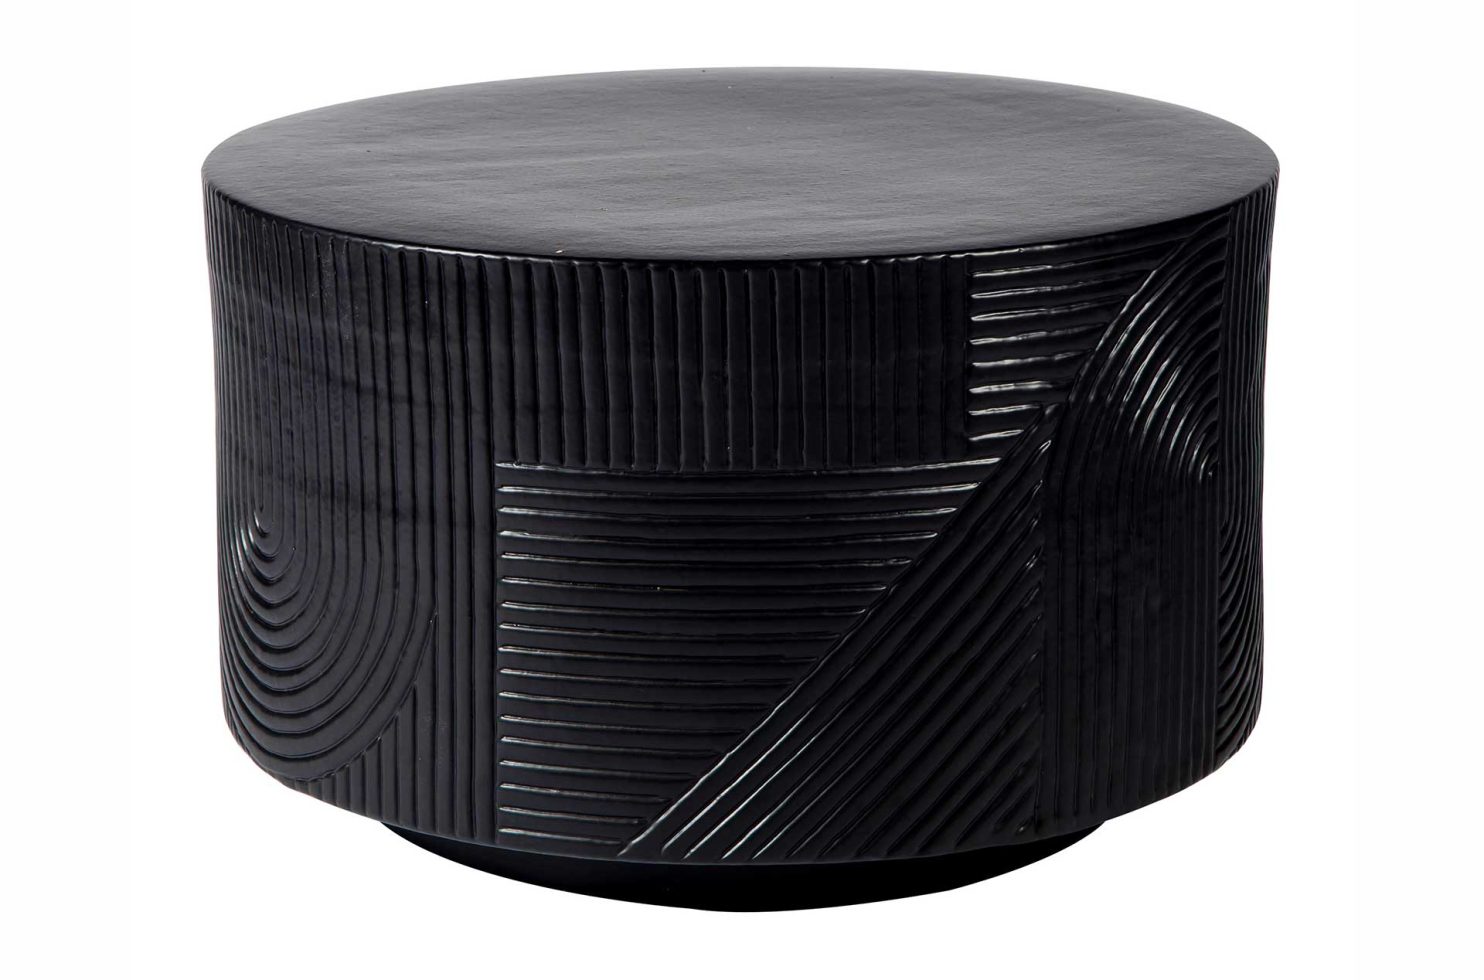 prov cer serenity textured round table 24in C30891432 coal 3 web